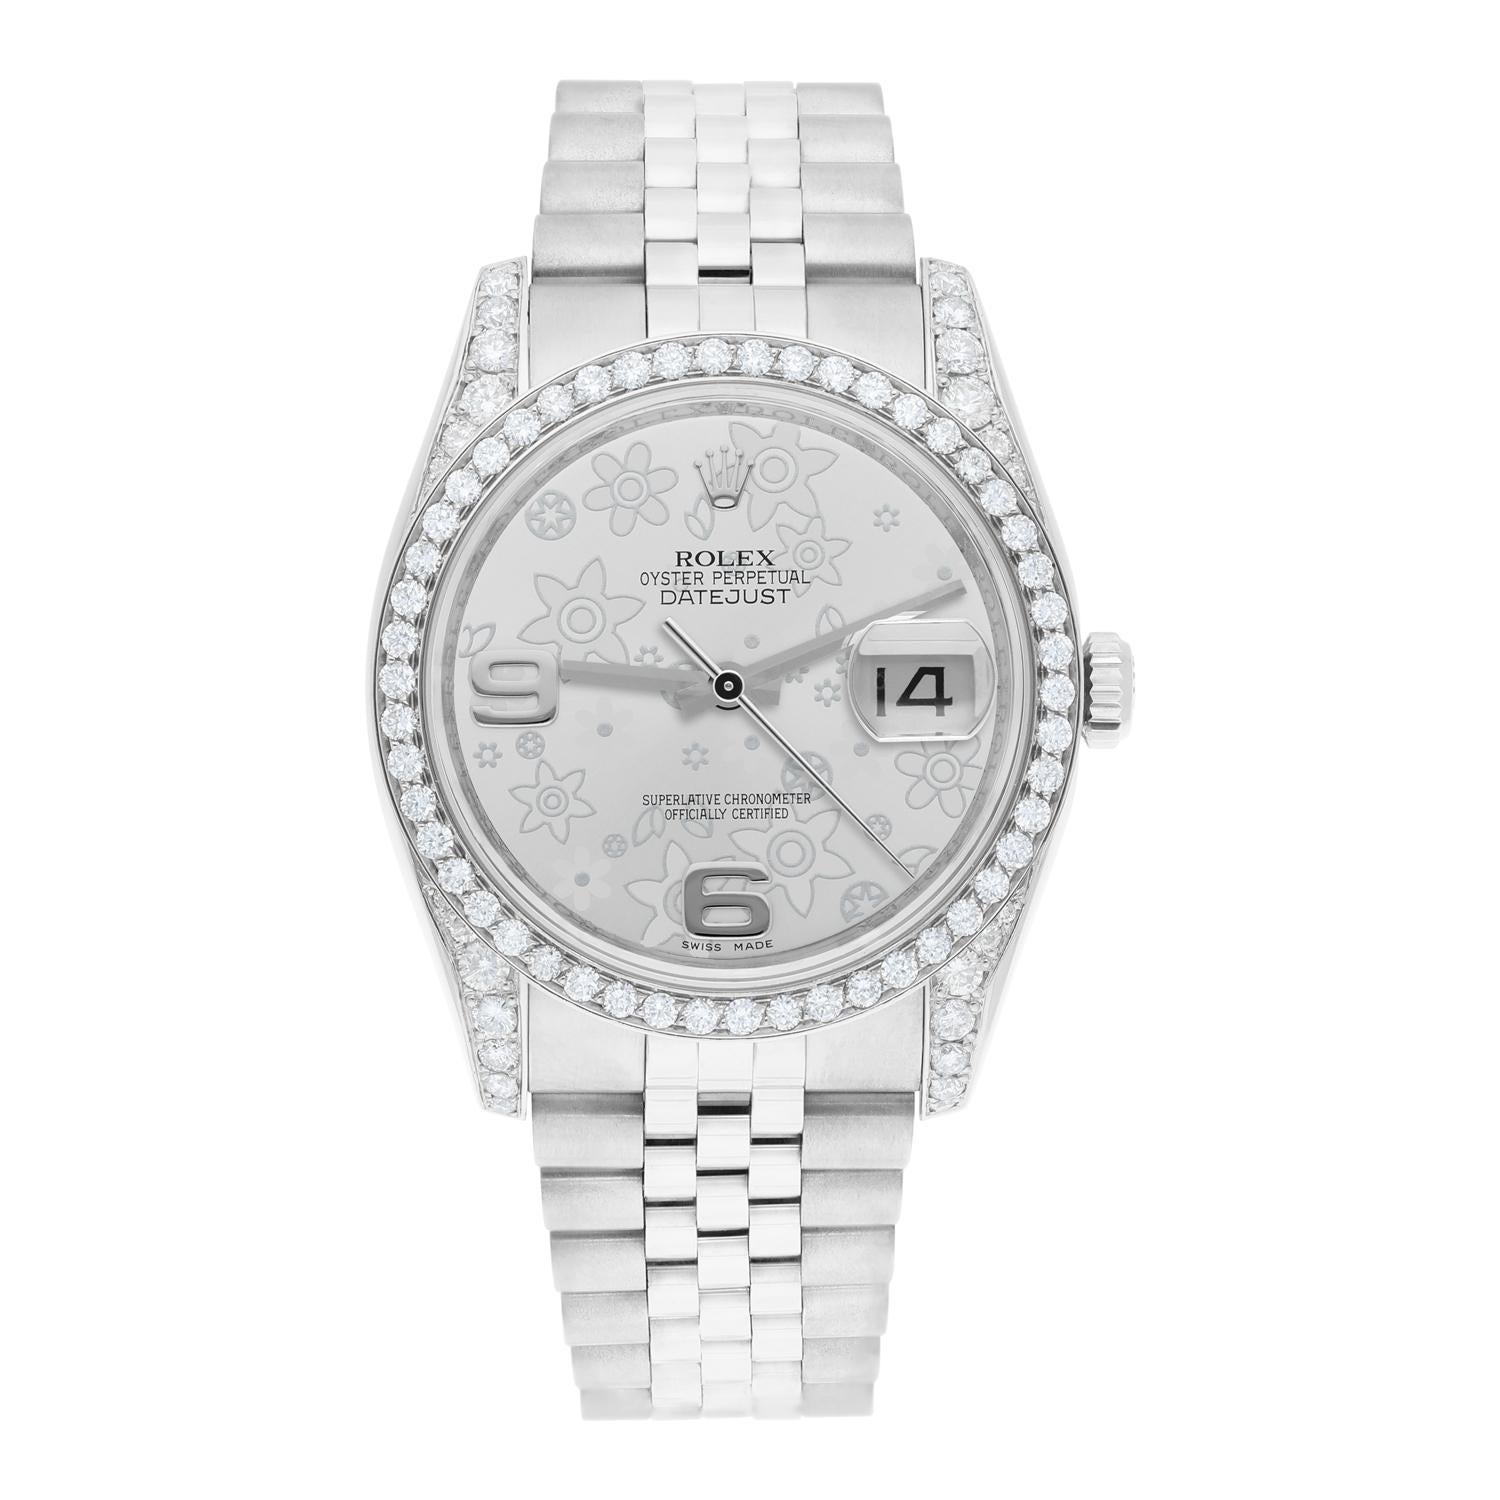 Brand: Rolex
Series: Datejust 
Model: 116234
Case Diameter: 36 mm
Bracelet: Jubilee band; stainless steel
Bezel. and Lugs: Custom Diamond Set
Dial: Silver Flower
Carat Weight: 2.30 carats in total diamond weight
The sale includes a Rolex box and an